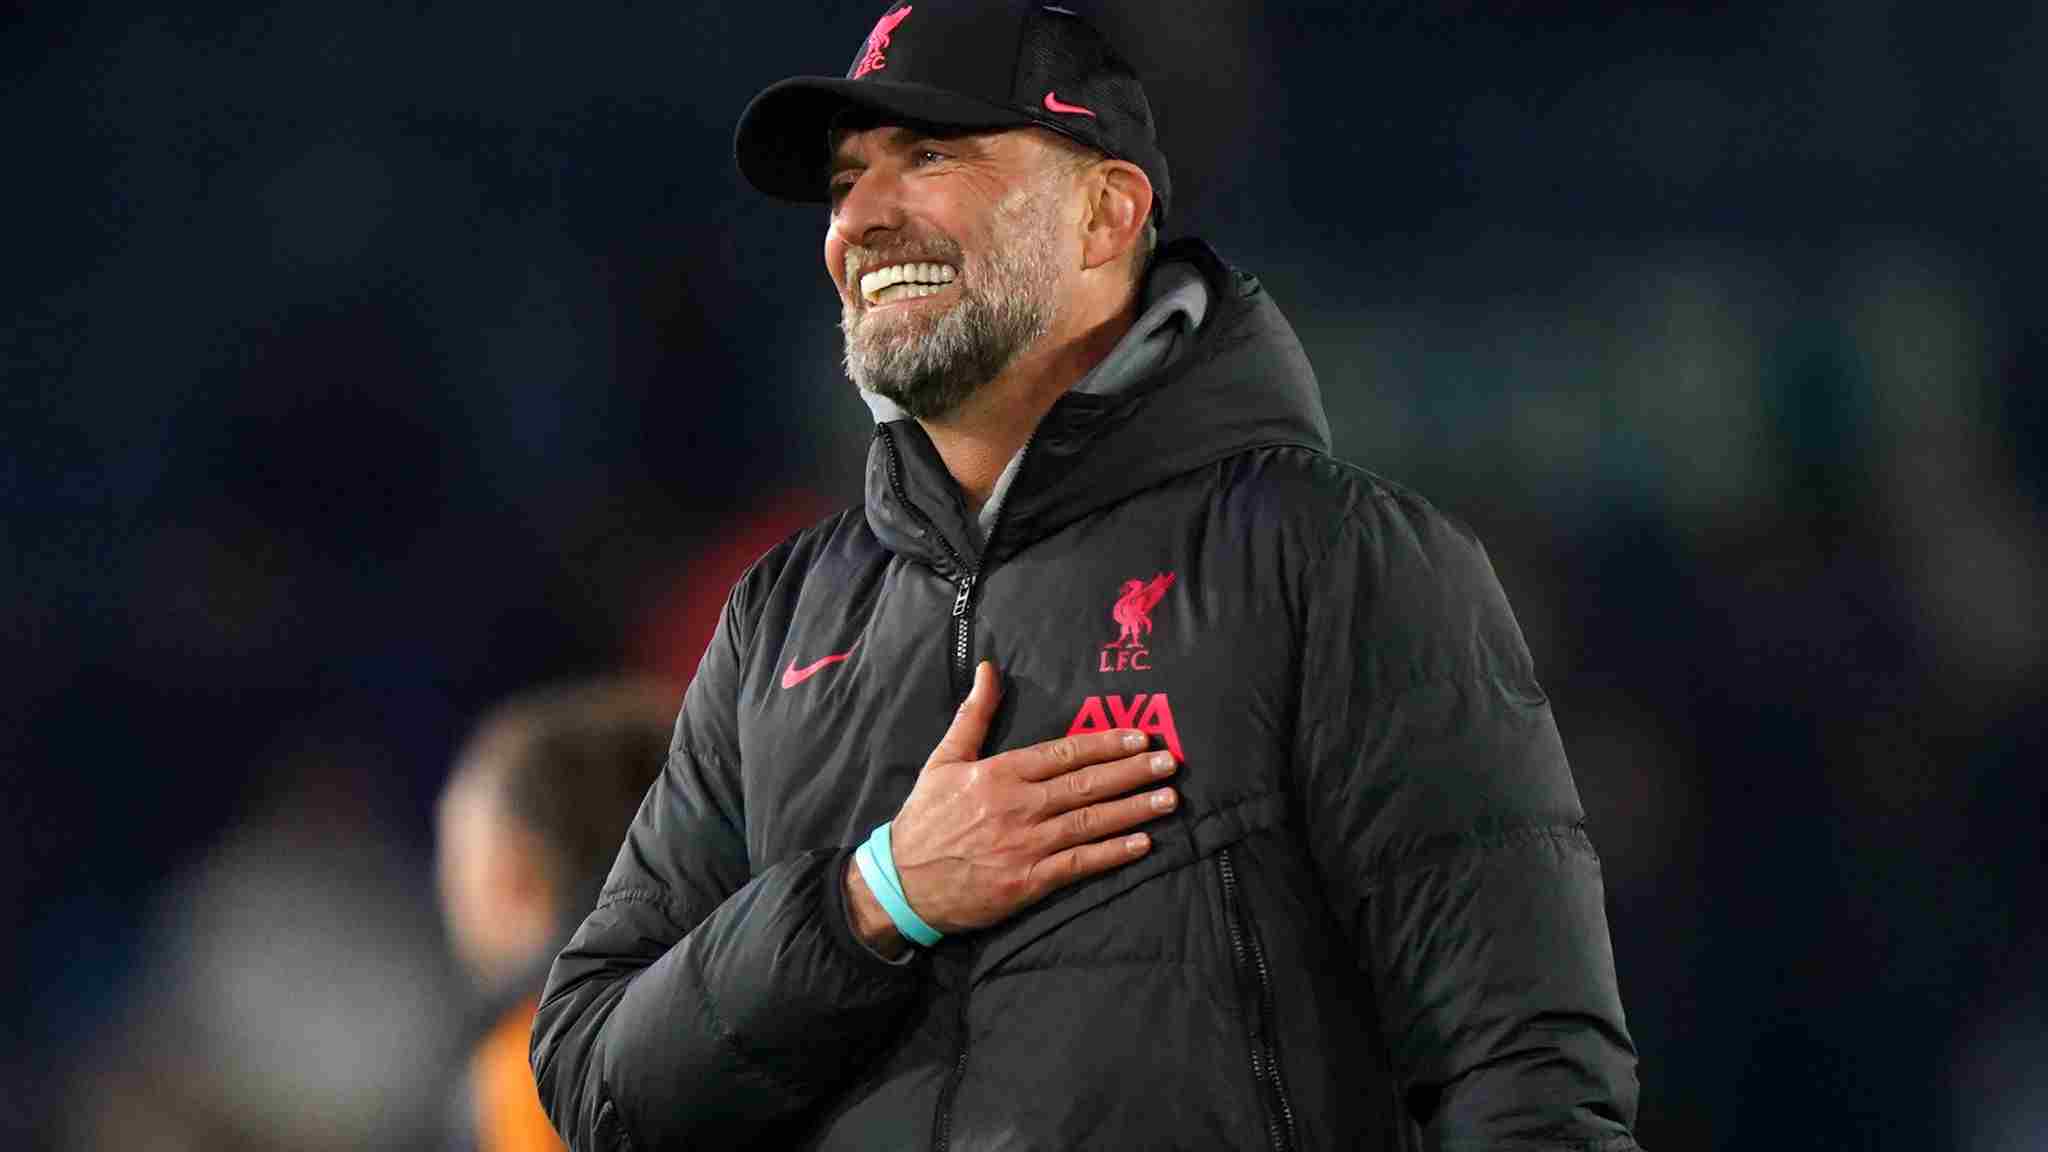 Latest Liverpool News: Liverpool Don't Want To Sign The Midfielder Any More